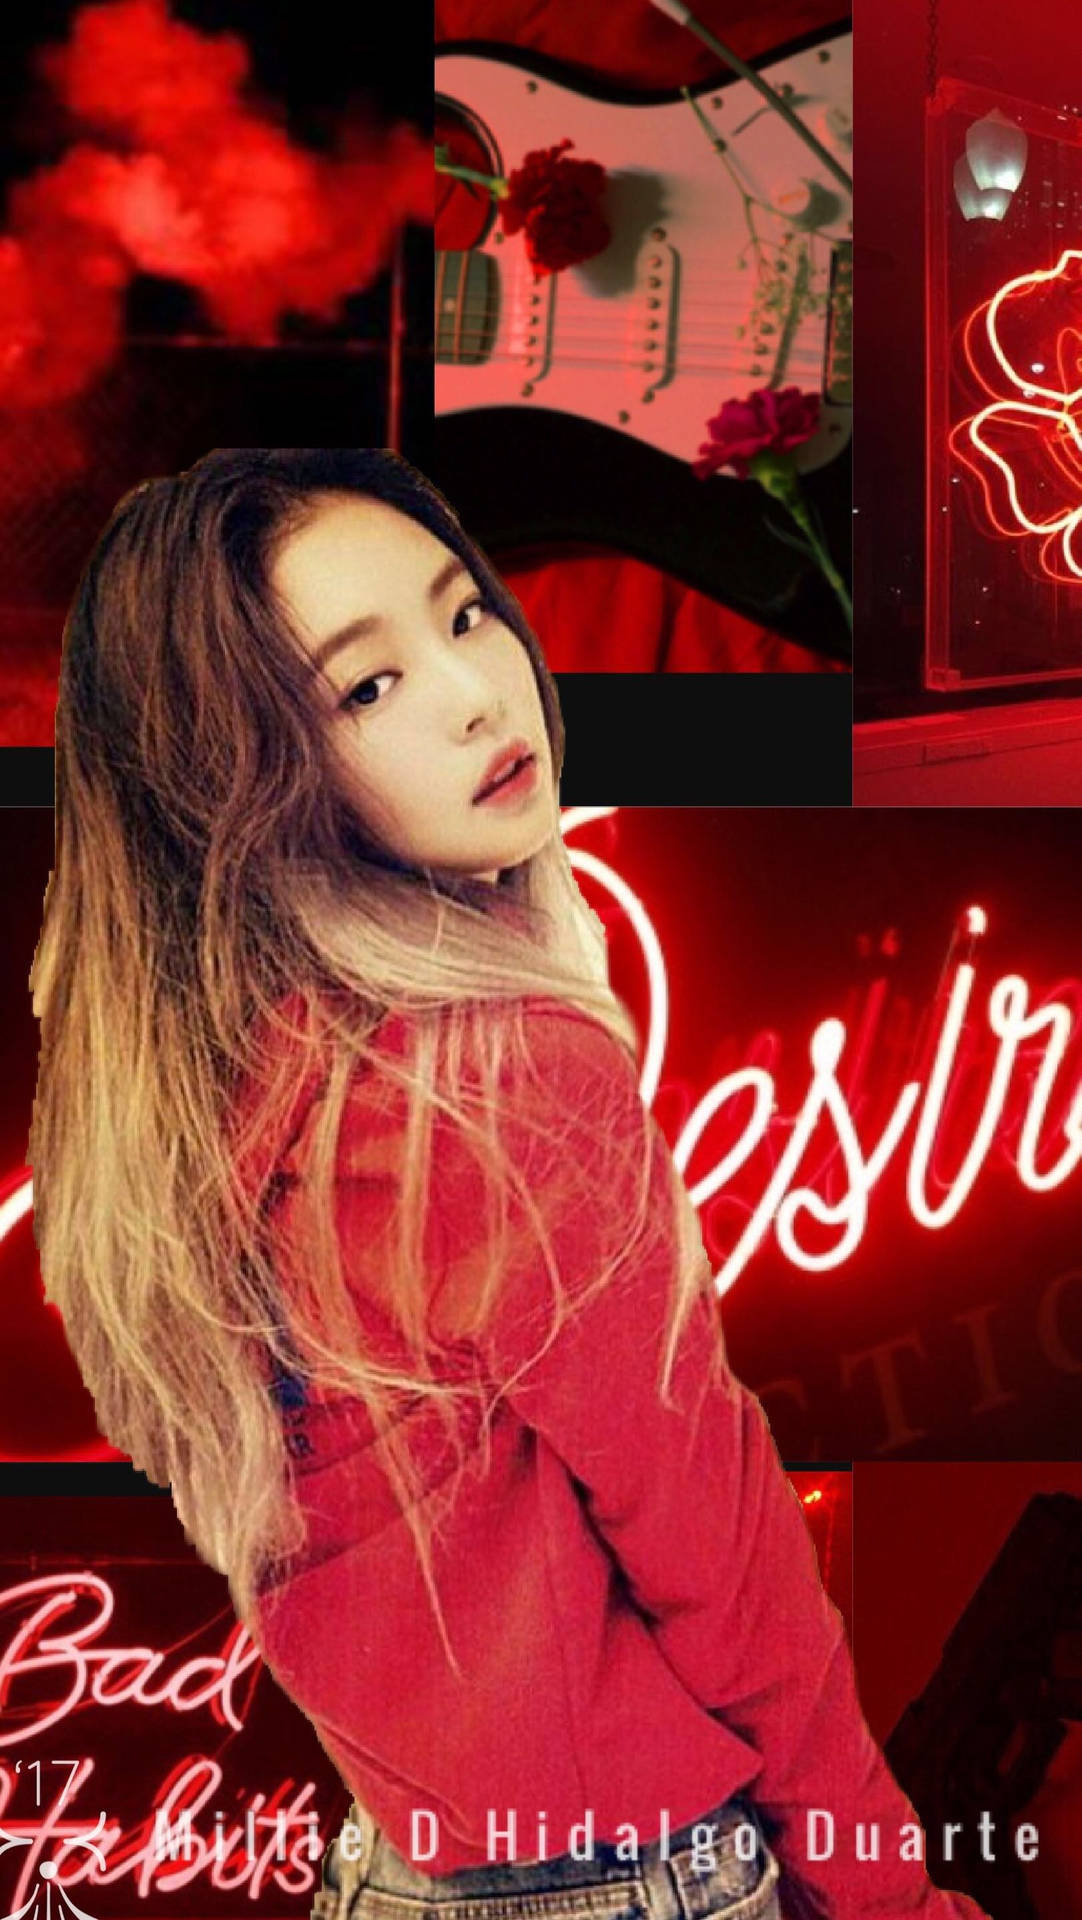 Download Jennie Kim On Red Aesthetic Wallpaper | Wallpapers.com